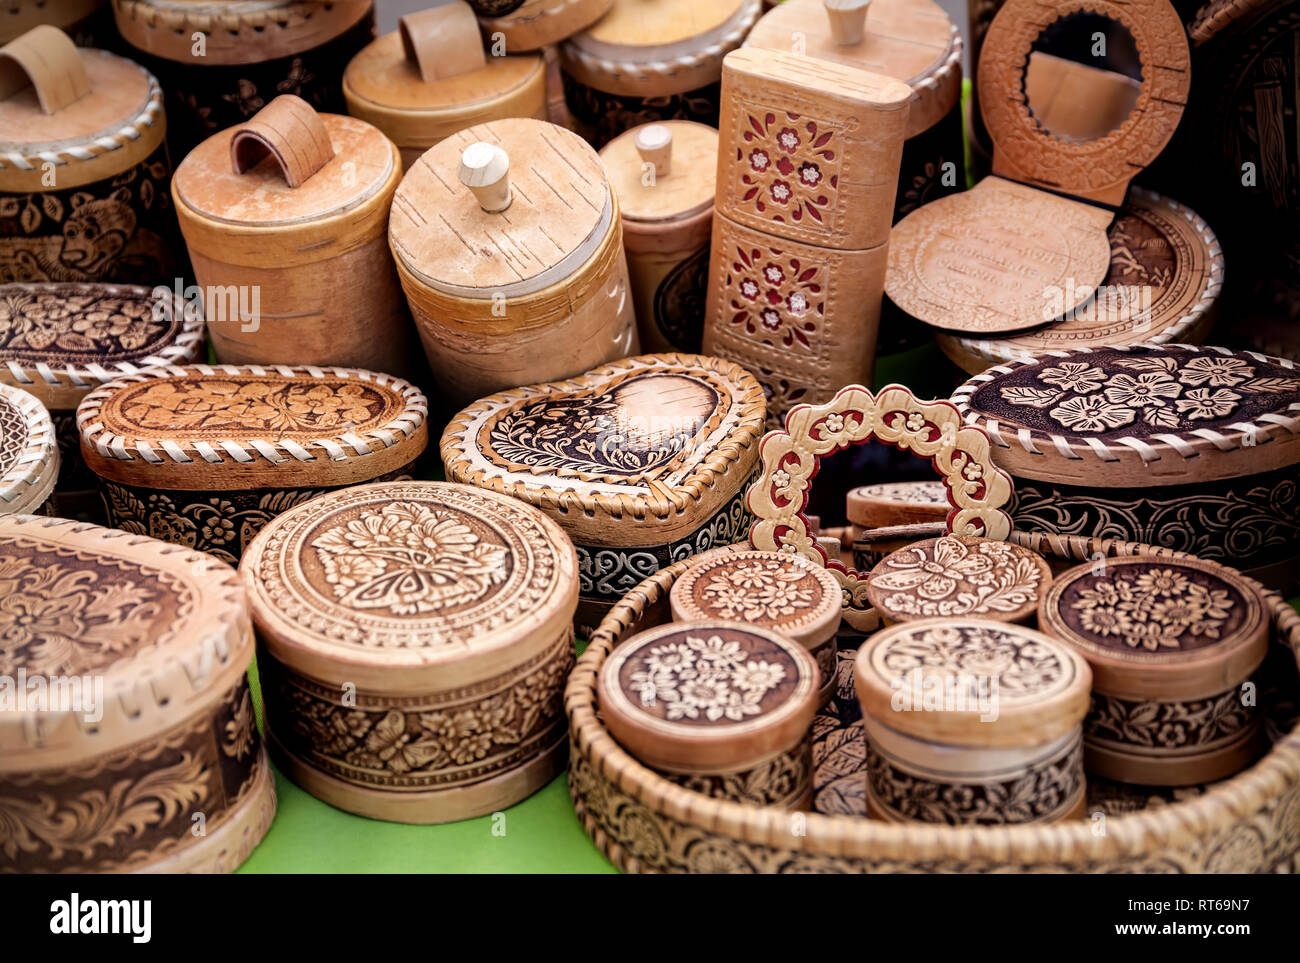 Ethnic wooden carved utensil and souvenirs in the market at Nauryz celebration in Almaty, Kazakhstan Stock Photo